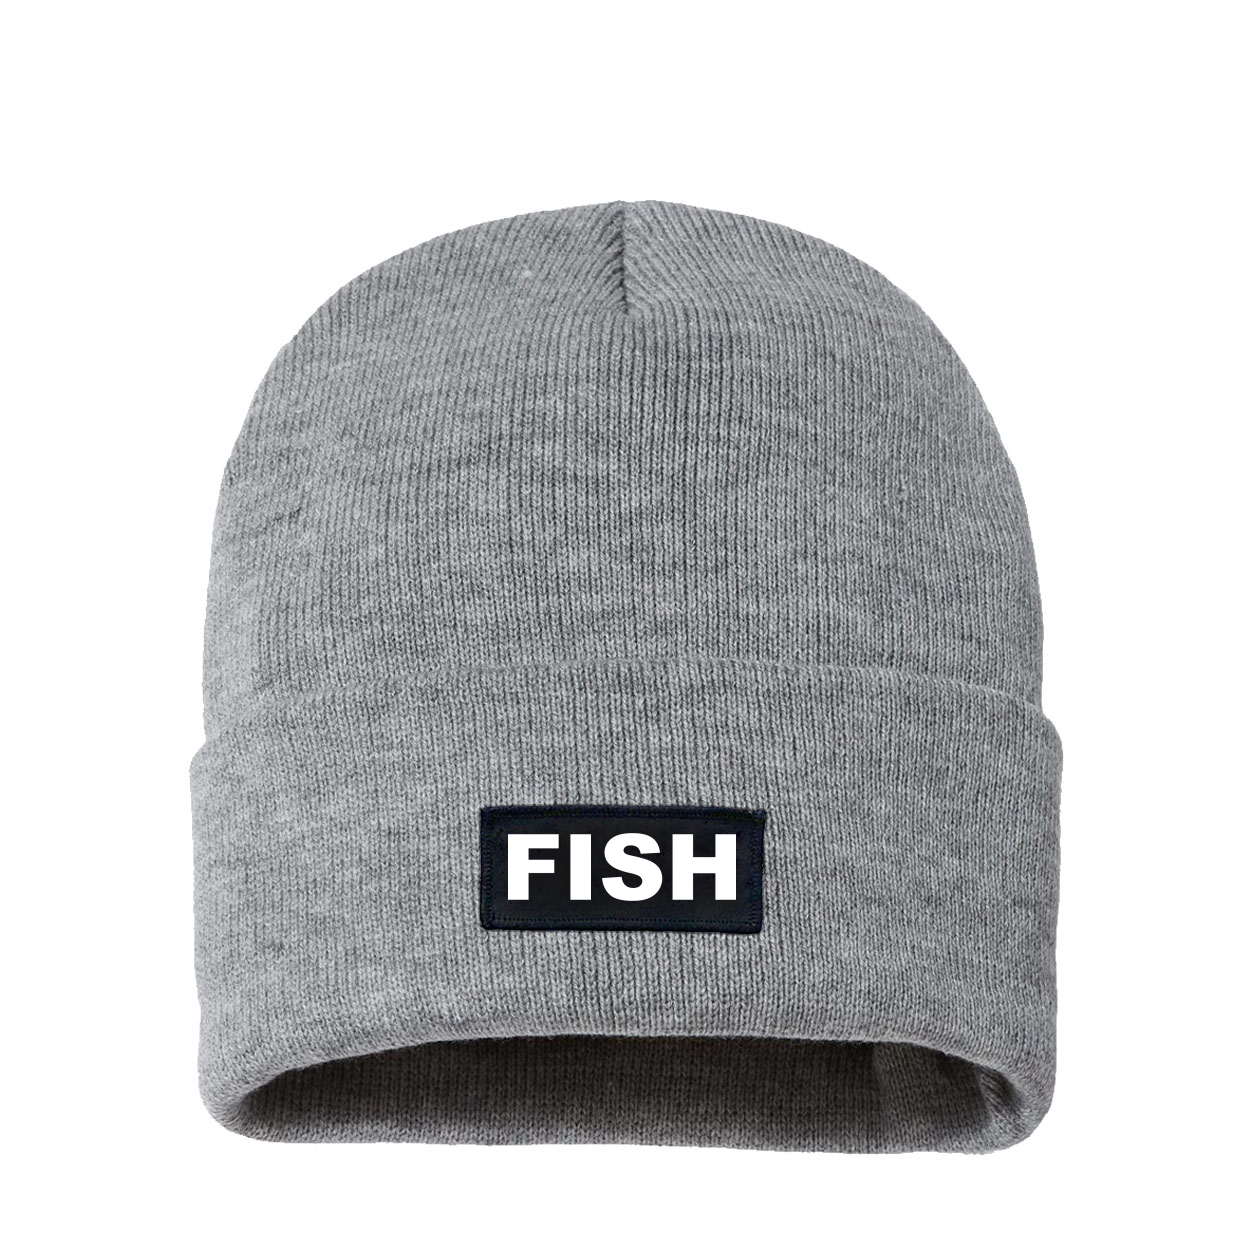 Fish Brand Logo Night Out Woven Patch Sherpa Lined Cuffed Beanie Heather Gray